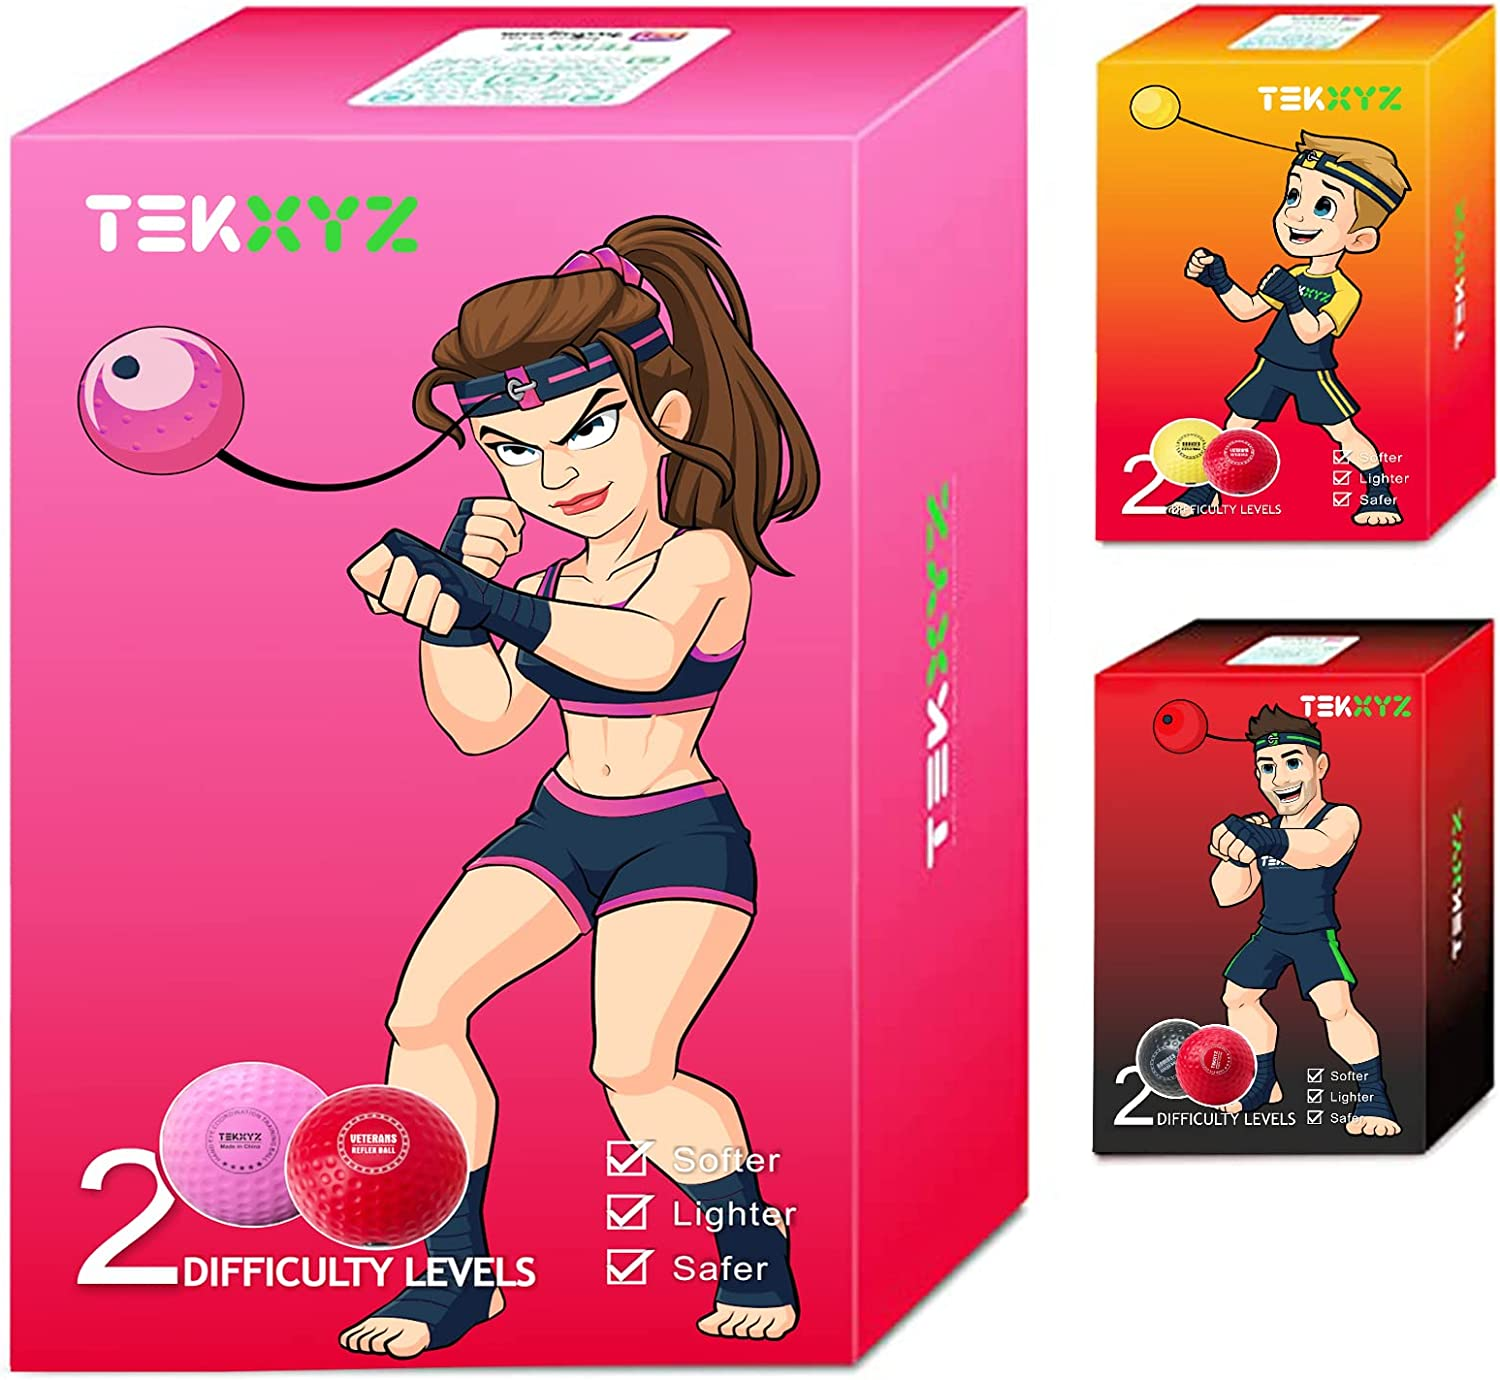 TEKXYZ Boxing Reflex Ball, 3 Difficulty Levels Boxing Ball with Headband,  Softer Than Tennis Ball, Perfect for Reaction, Agility, Punching Speed,  Fight Skill and Hand Eye Coordination Training